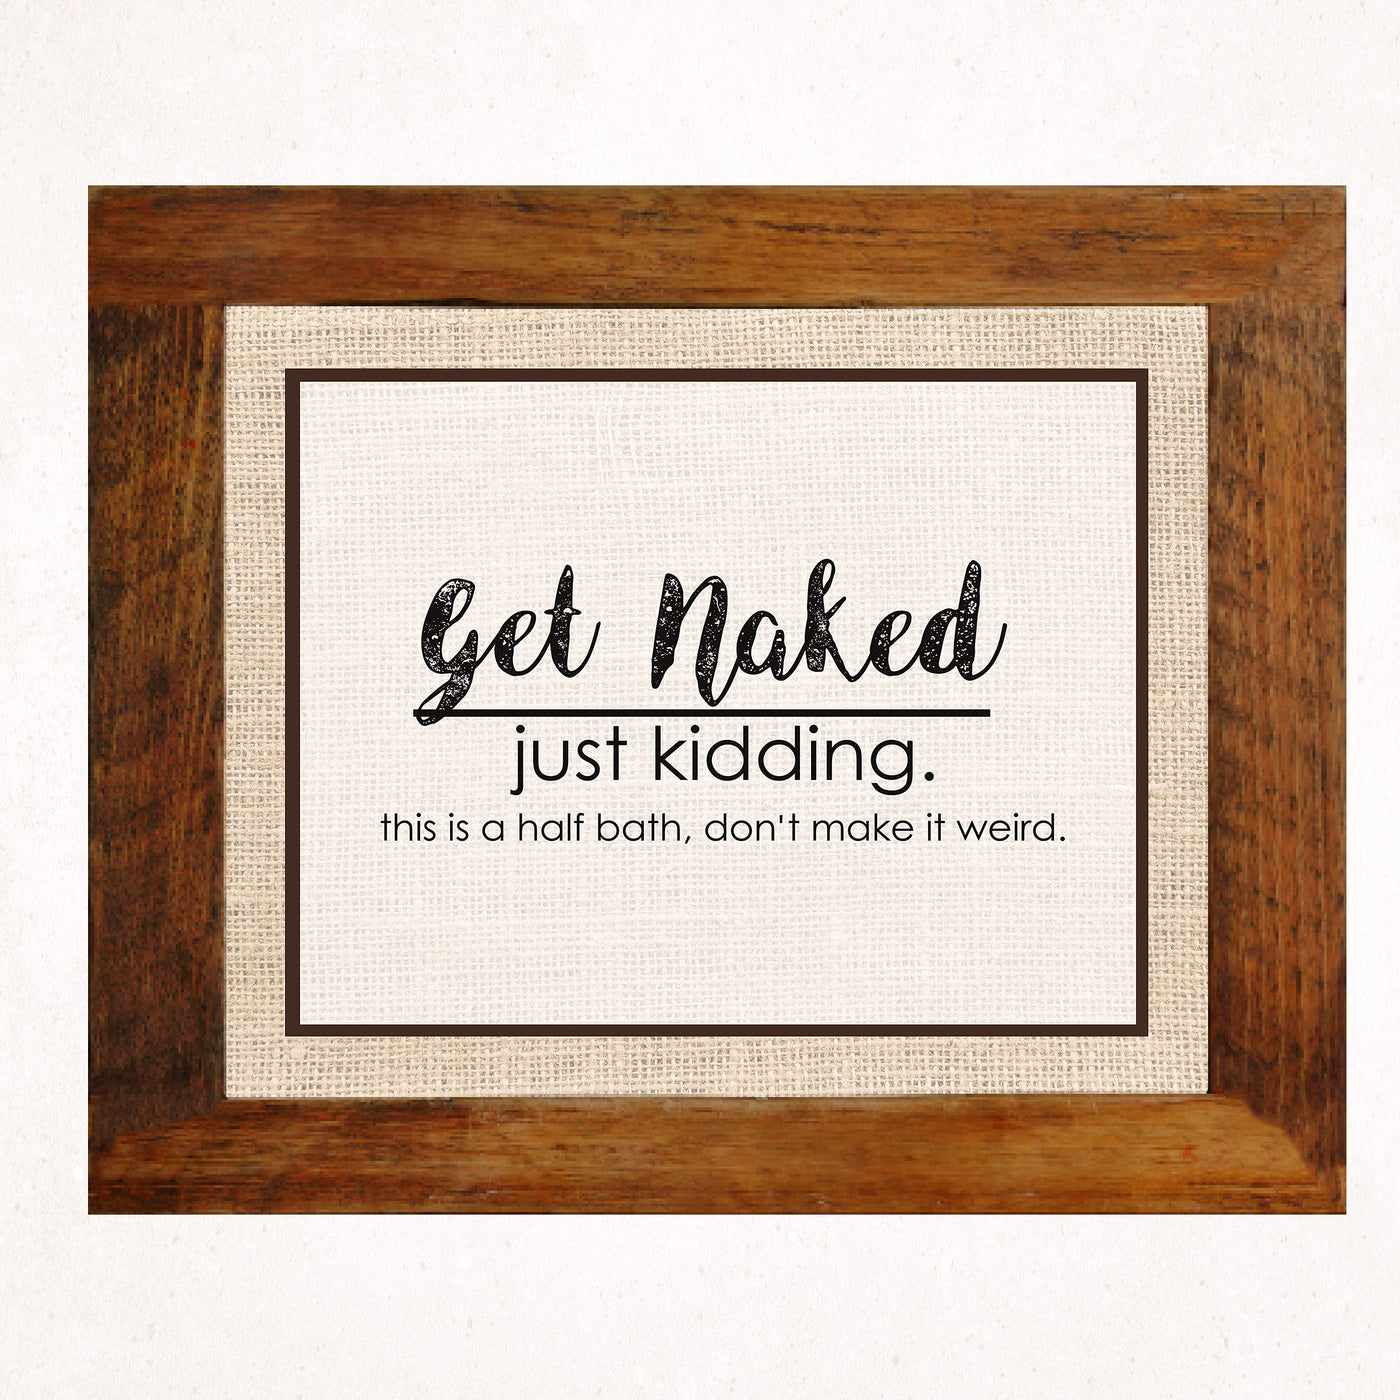 Get Naked-Just Kidding-This Is a Half Bath- Funny Bathroom Sign- 10 x 8" -Rustic Distressed Wall Print-Ready to Frame. Humorous Decor Perfect for Guest Bathroom! Great Novelty Housewarming Gift!